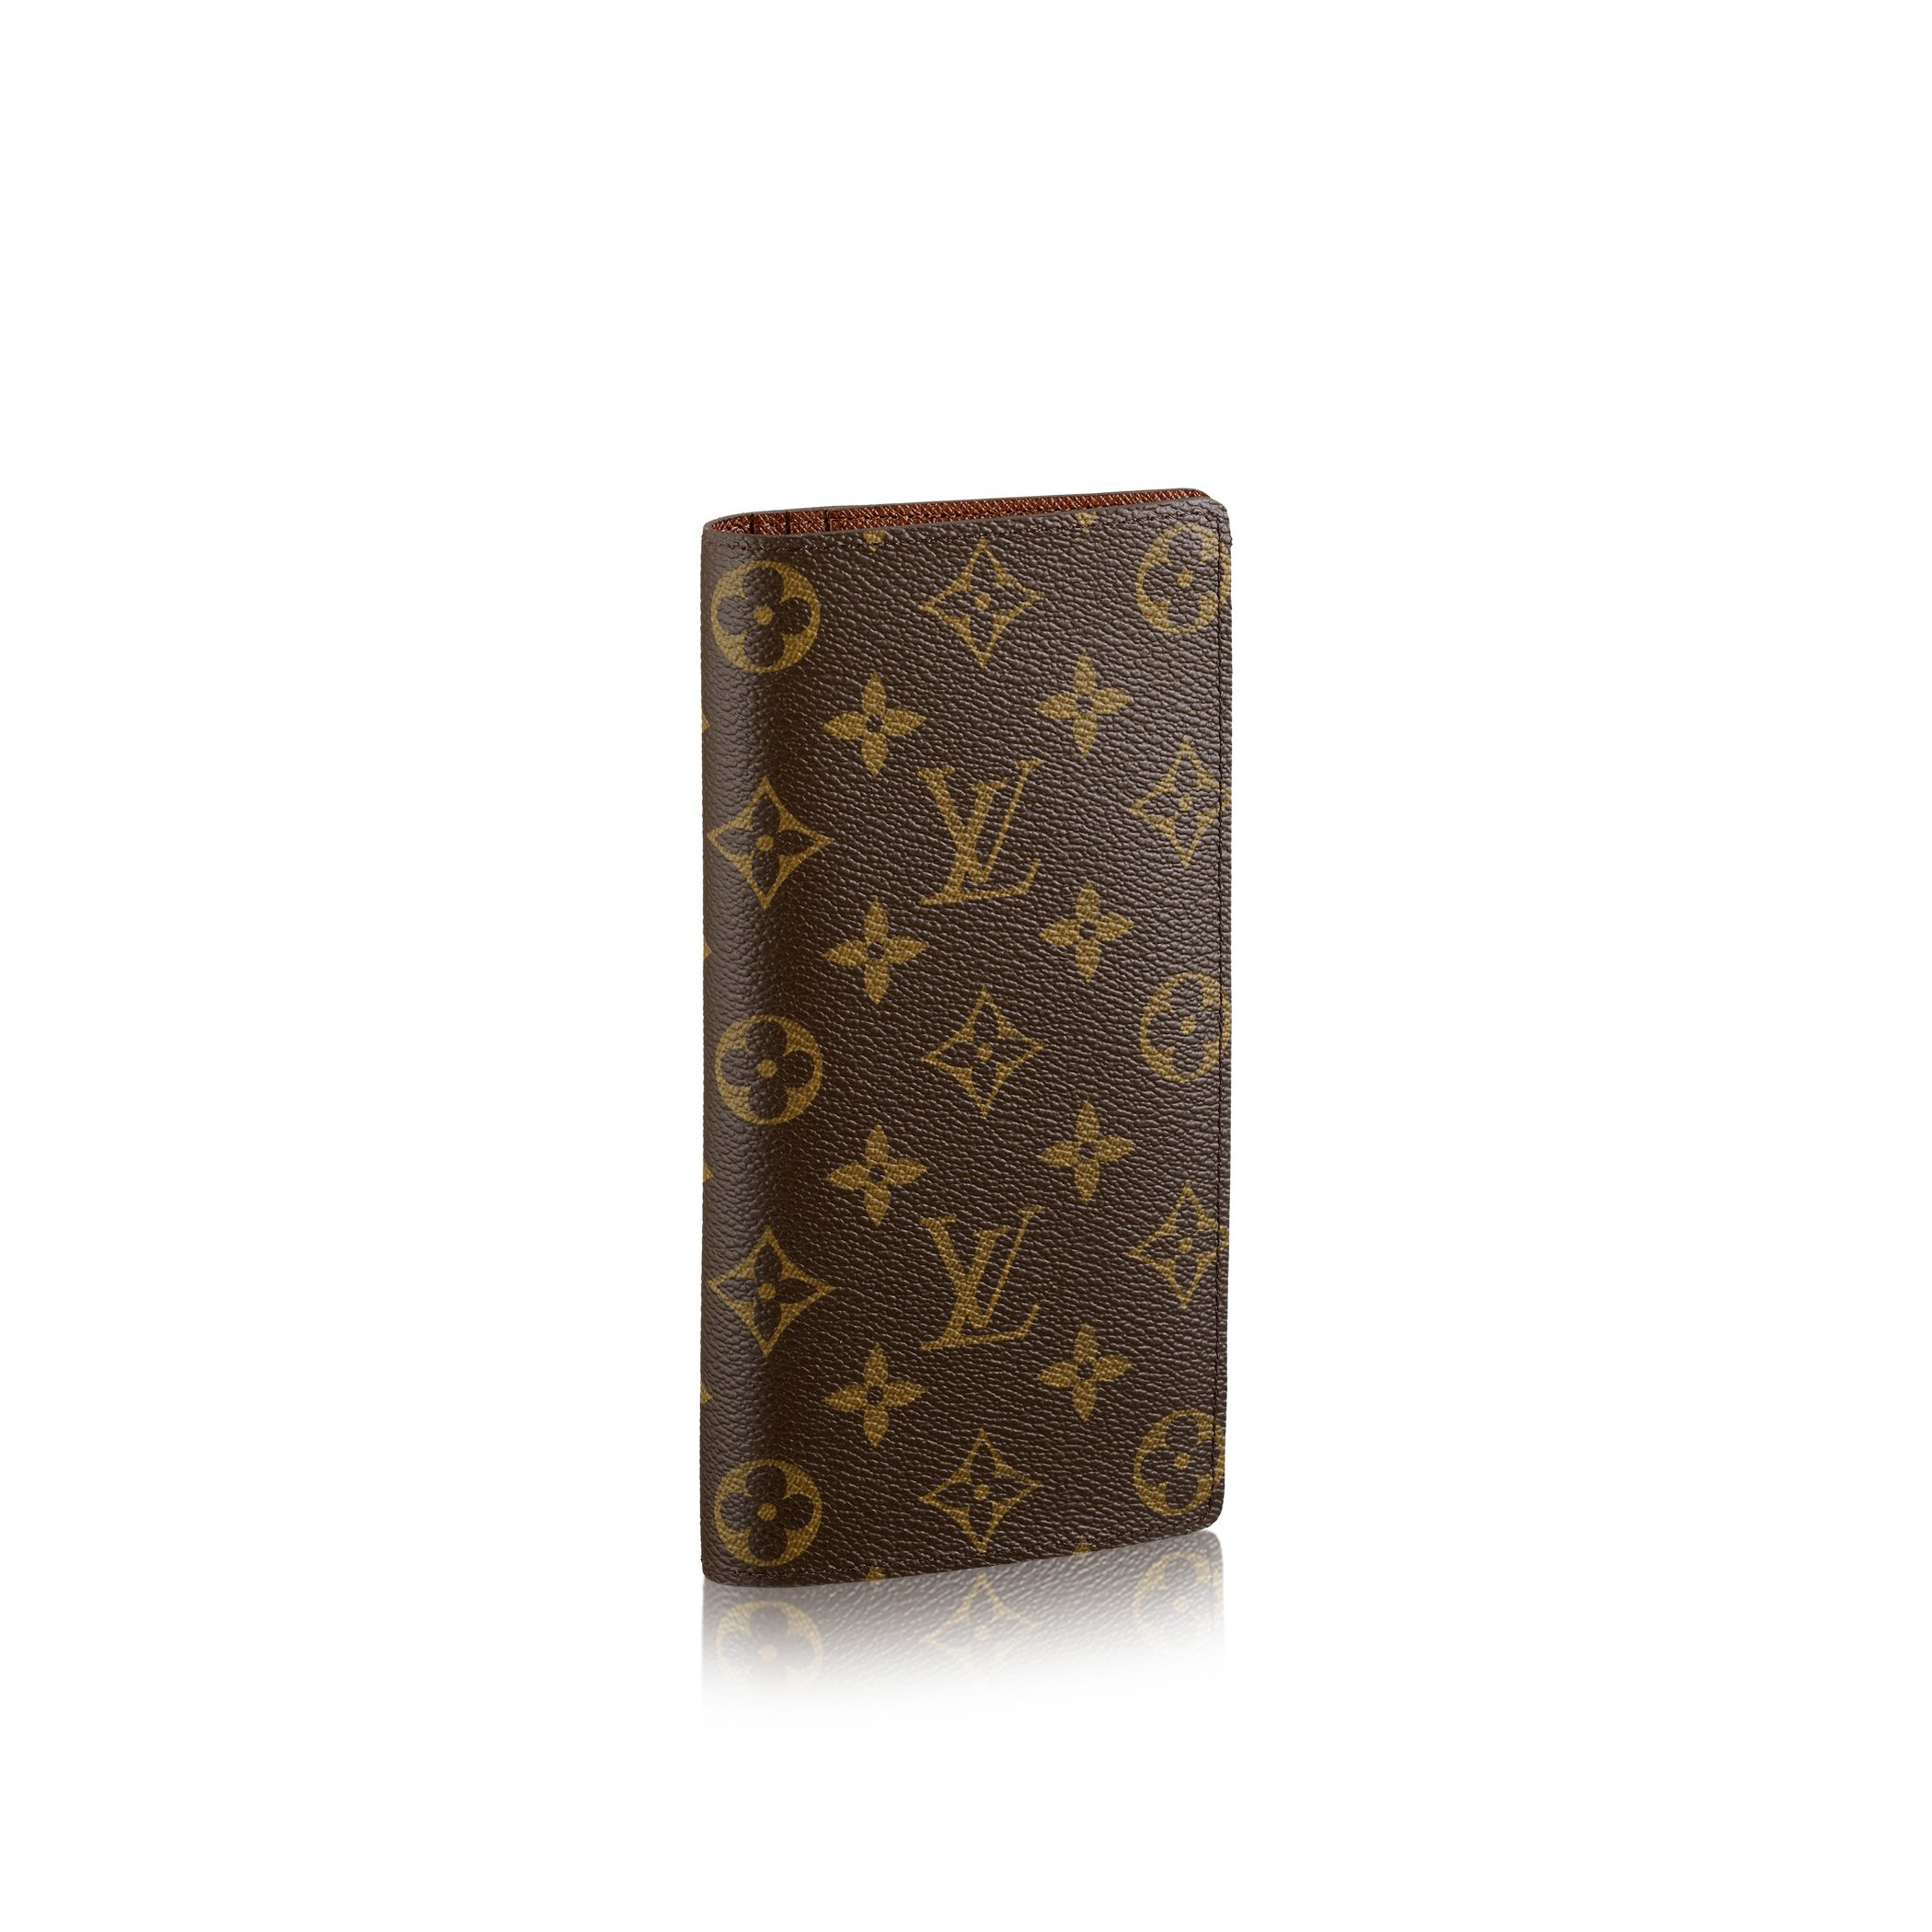 Most Popular Lv Wallets For Men Paul Smith